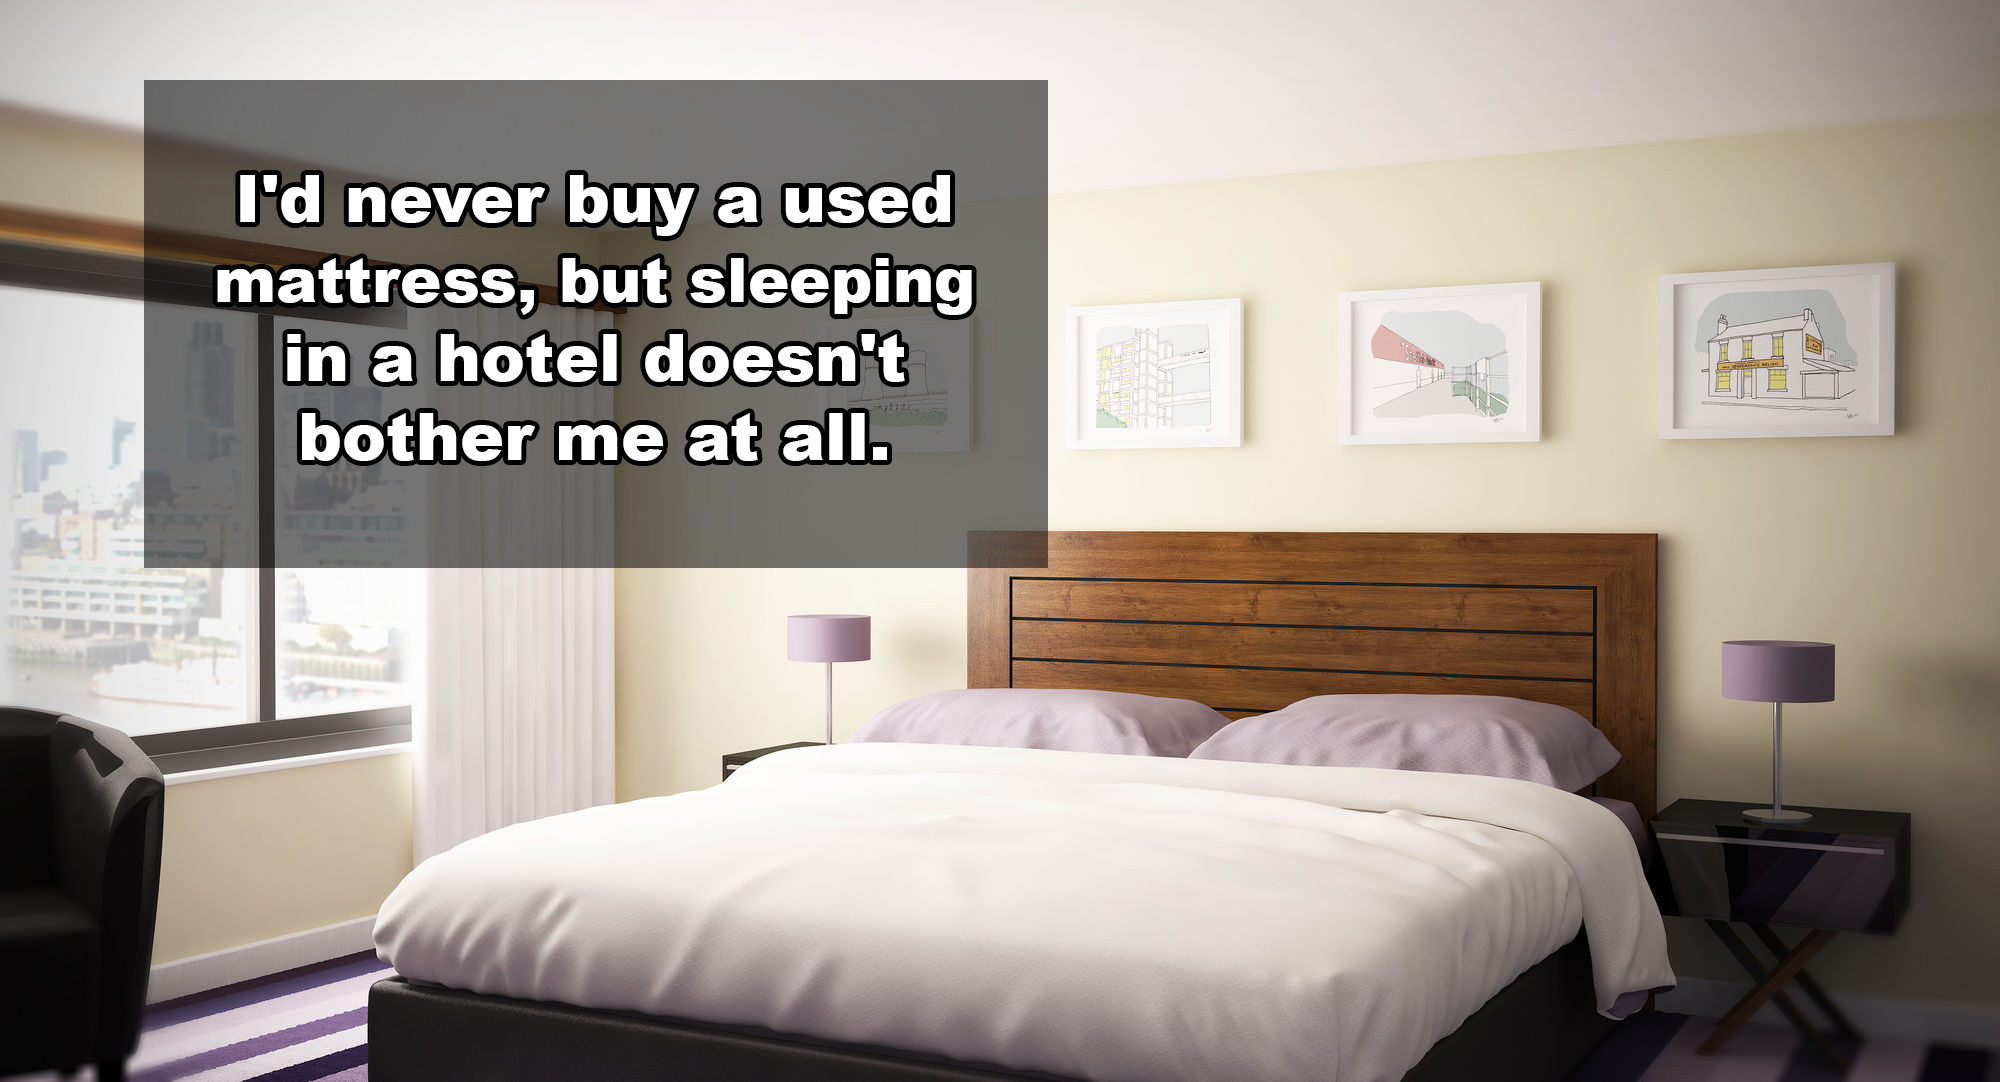 Hotel - I'd never buy a used mattress, but sleeping in a hotel doesn't bother me at all.